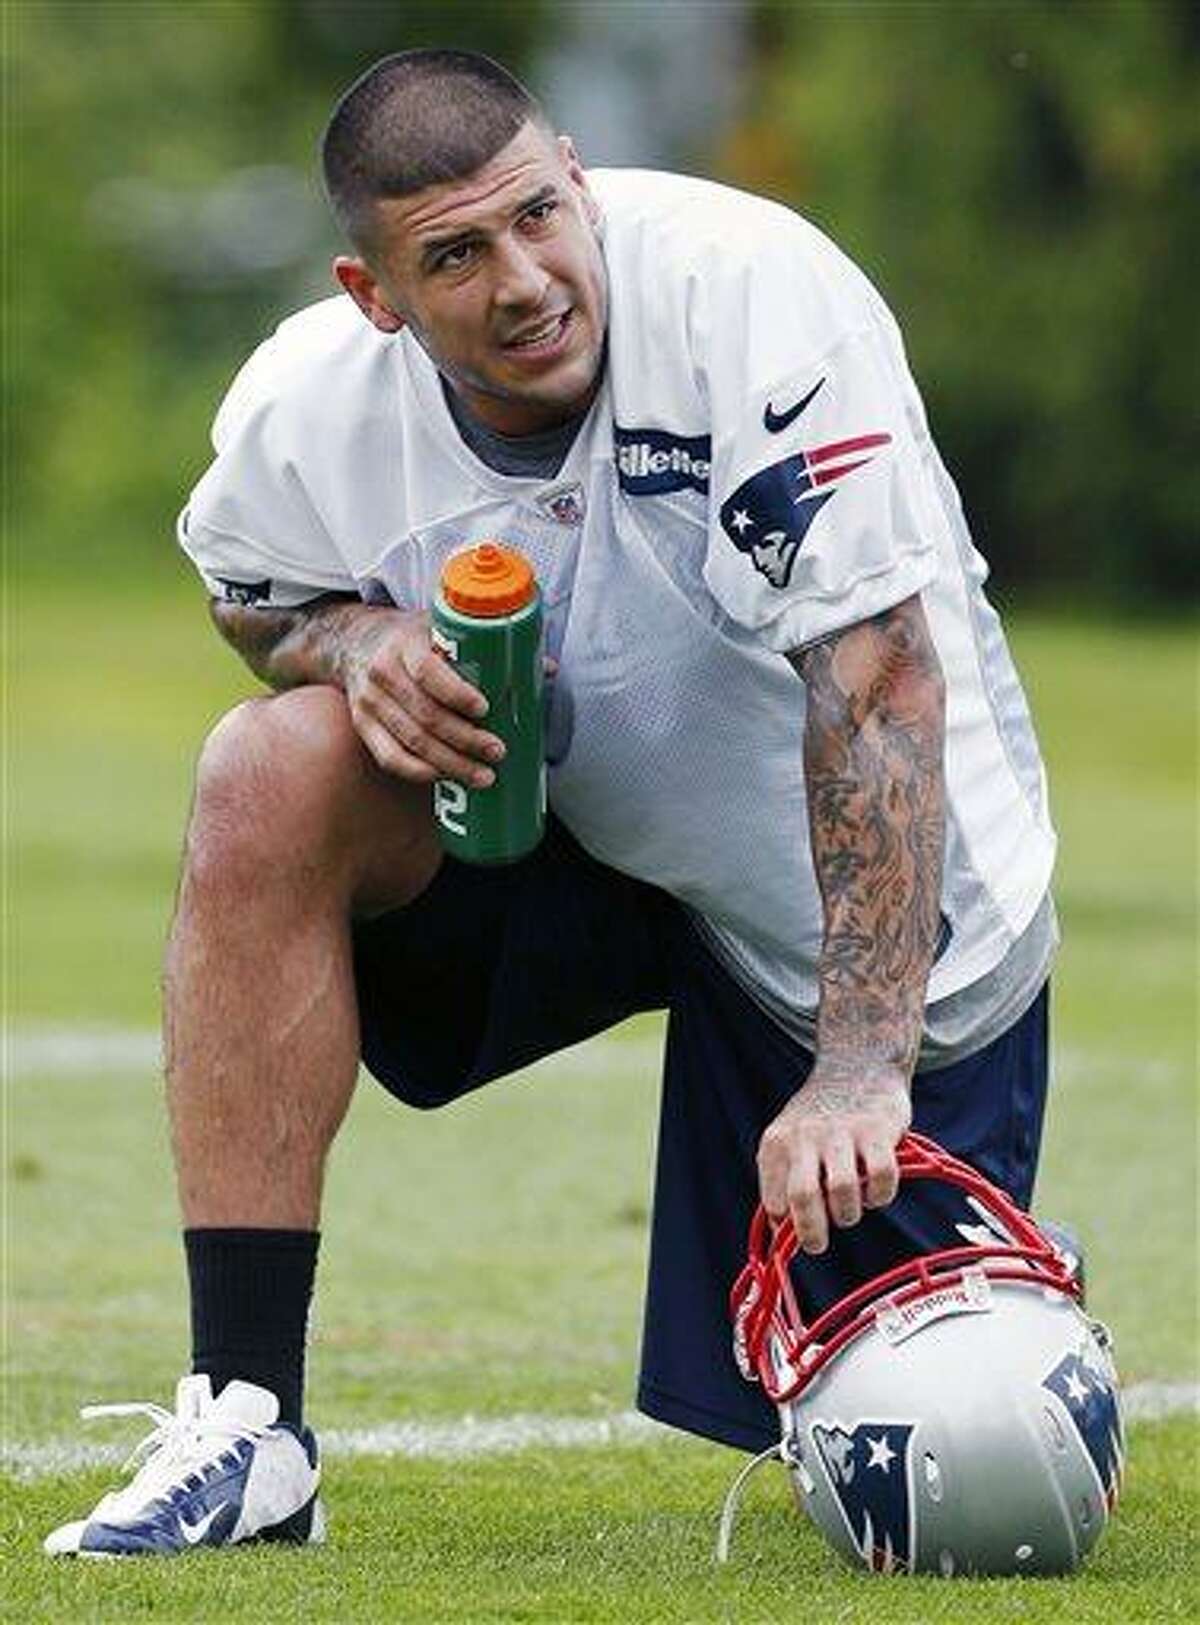 FILE - In this May 29, 2013, file photo, New England Patriots' Aaron Hernandez kneels on the field during NFL football practice in Foxborough, Mass. A Massachusetts court has sealed documents related to the killing of a semi-pro football player found dead a mile from Hernandez's home. Attleboro District Court officials said Tuesday, June 25, 2013 that documents related to the case, including search warrants, have been impounded, meaning the public can't see them. No charges have been filed. (AP Photo/Michael Dwyer, File)